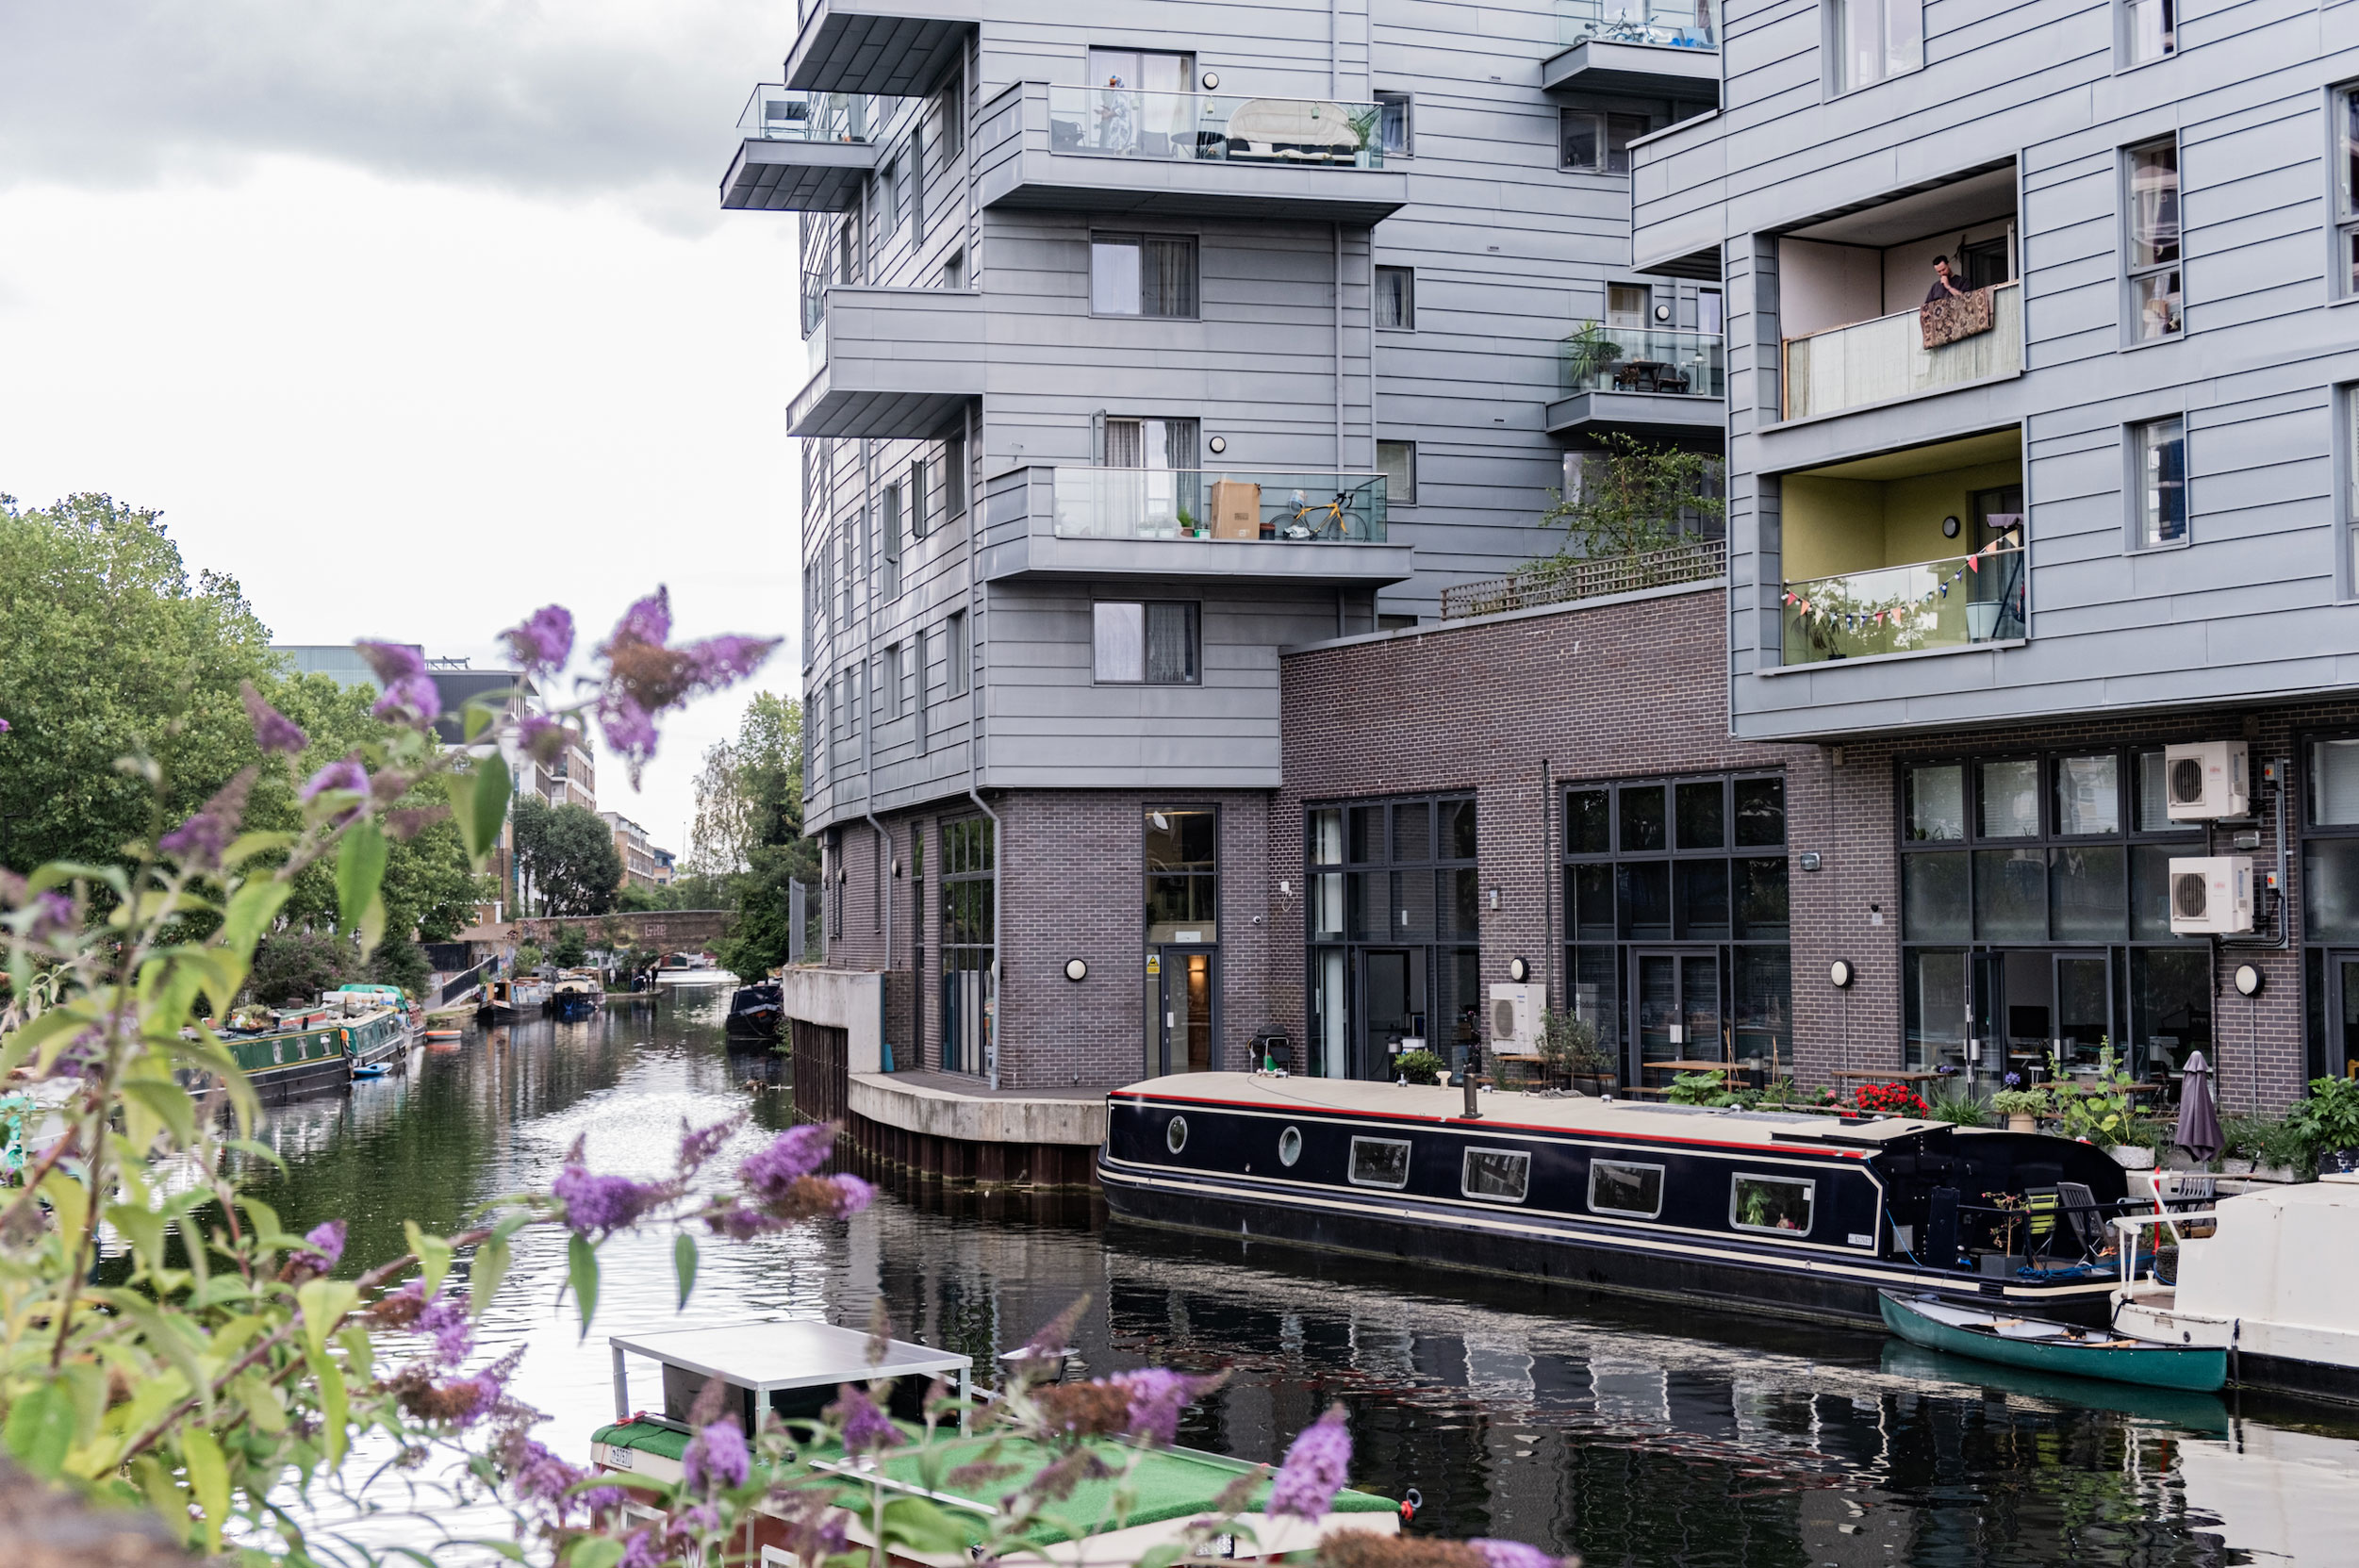 Photo of property at the Union Canal in London